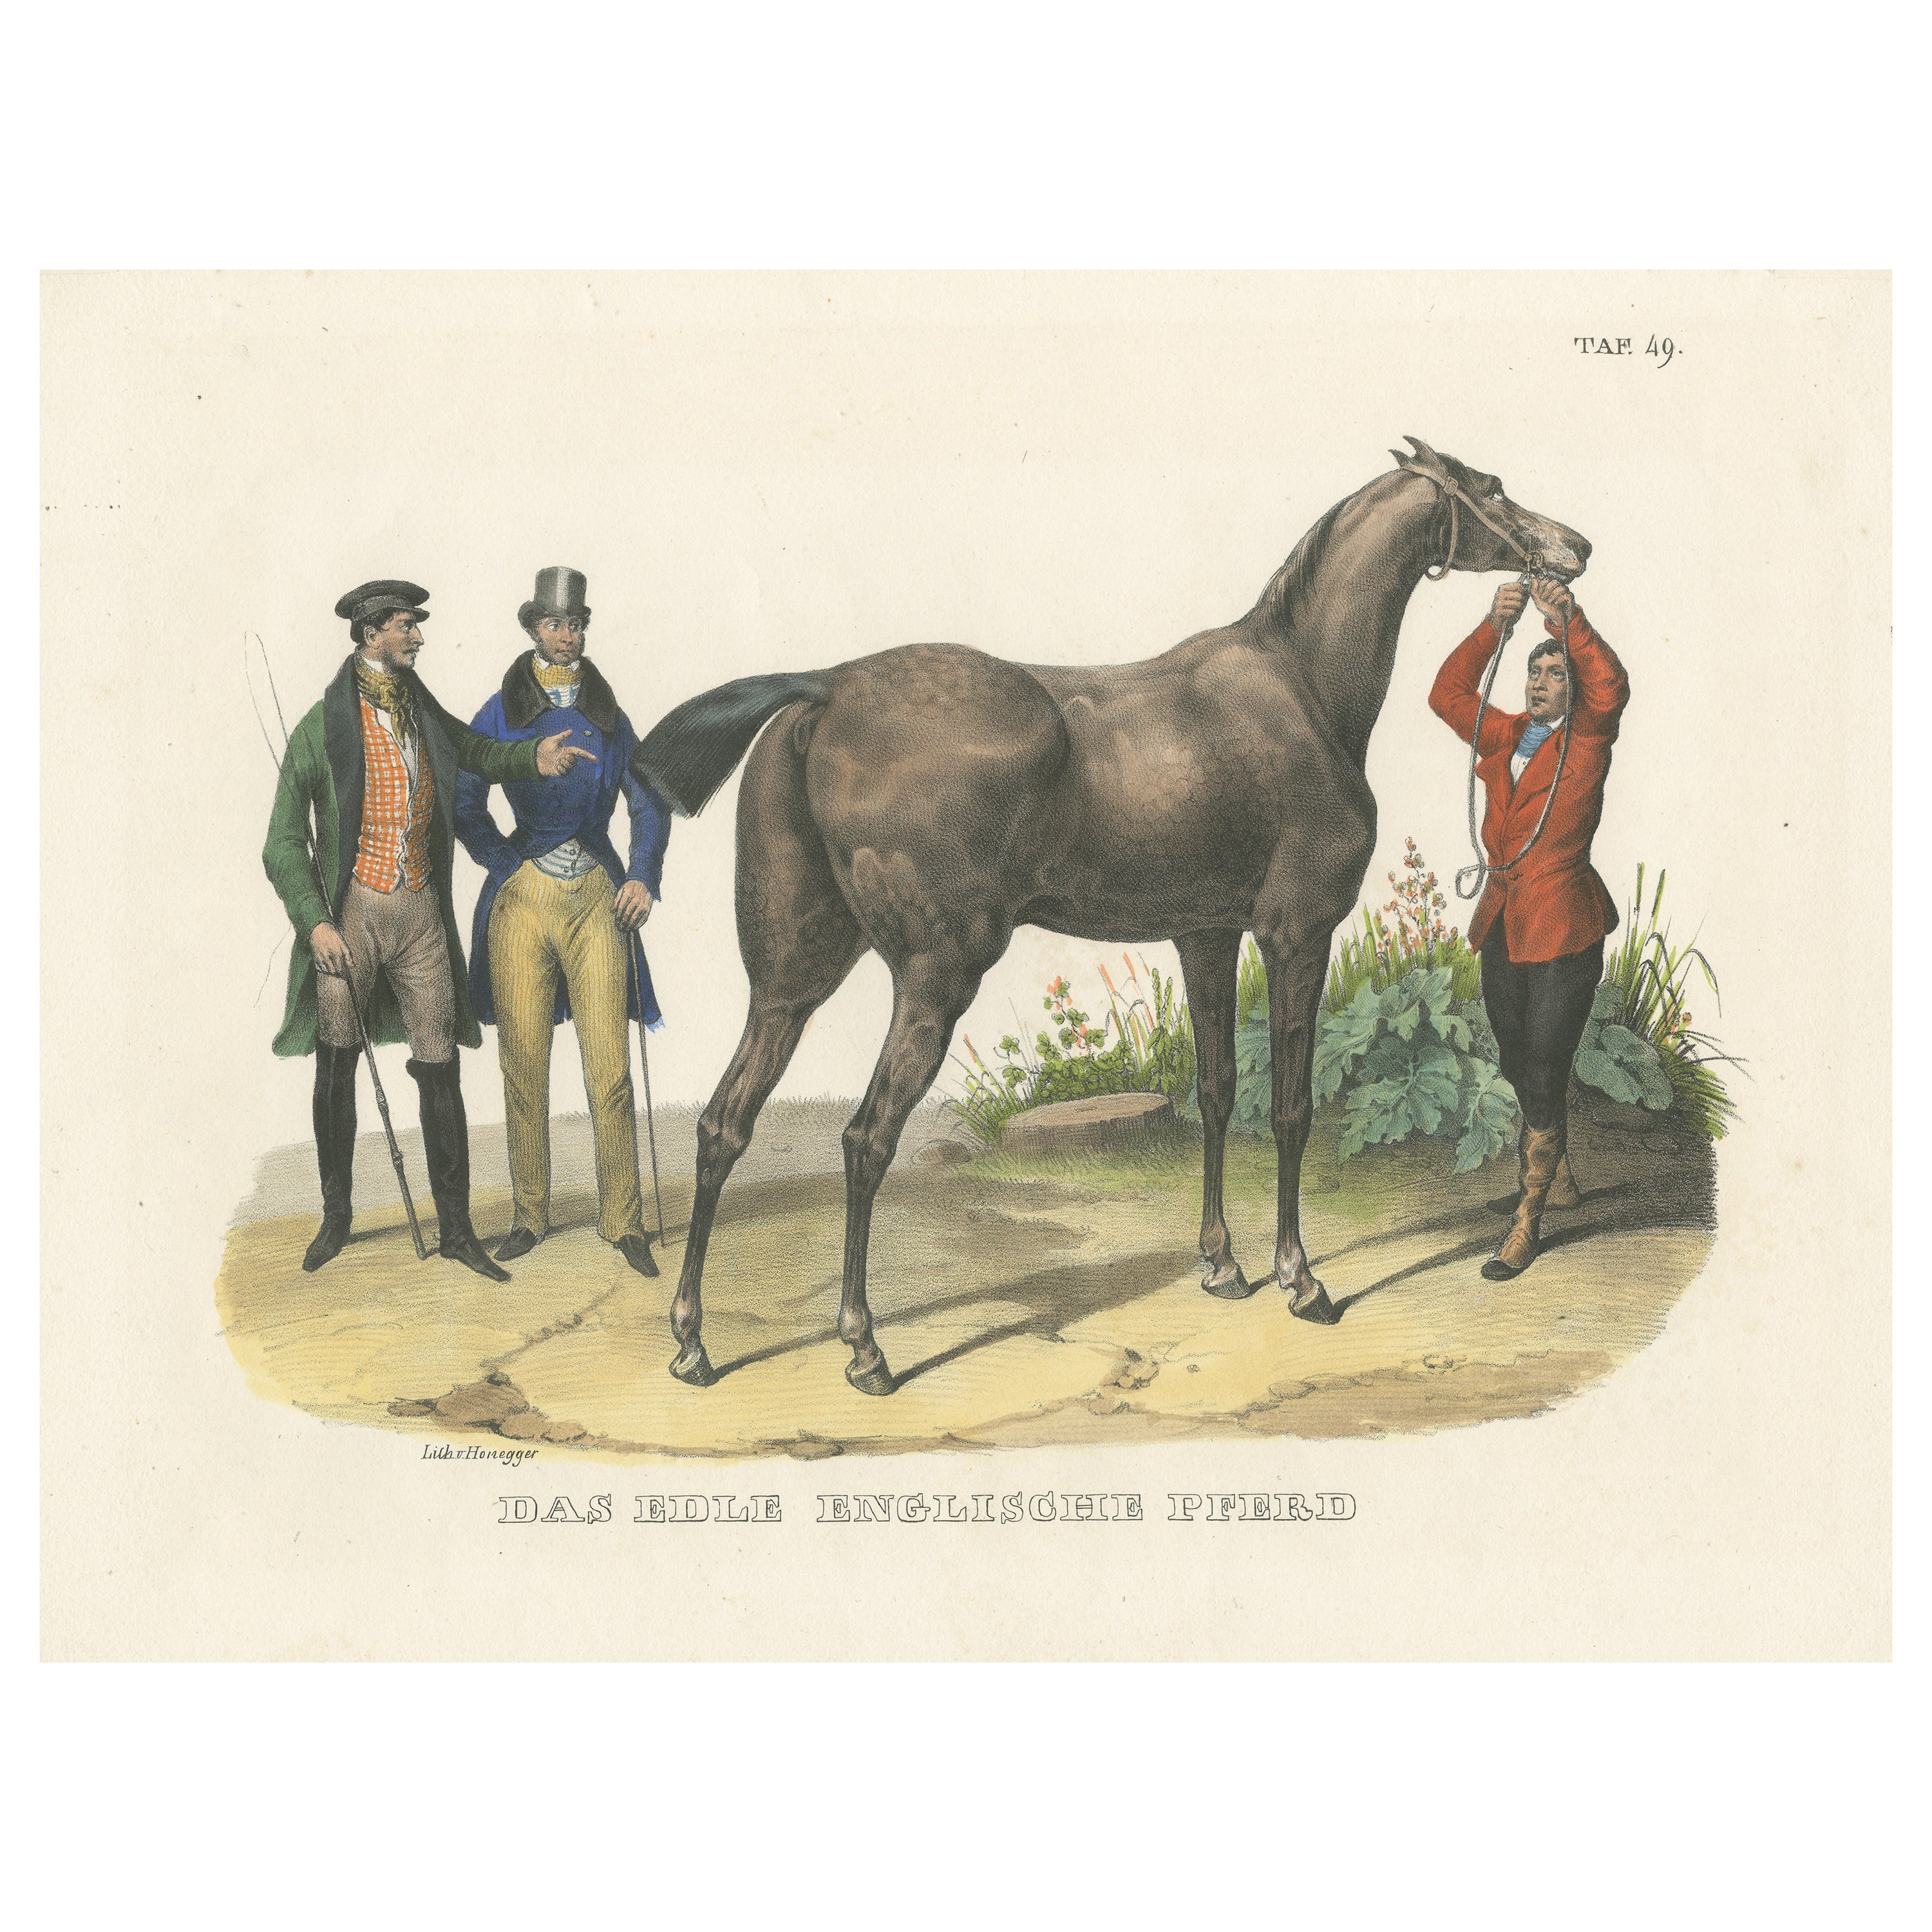 Original Hand Colored Antique Print of an English Horse